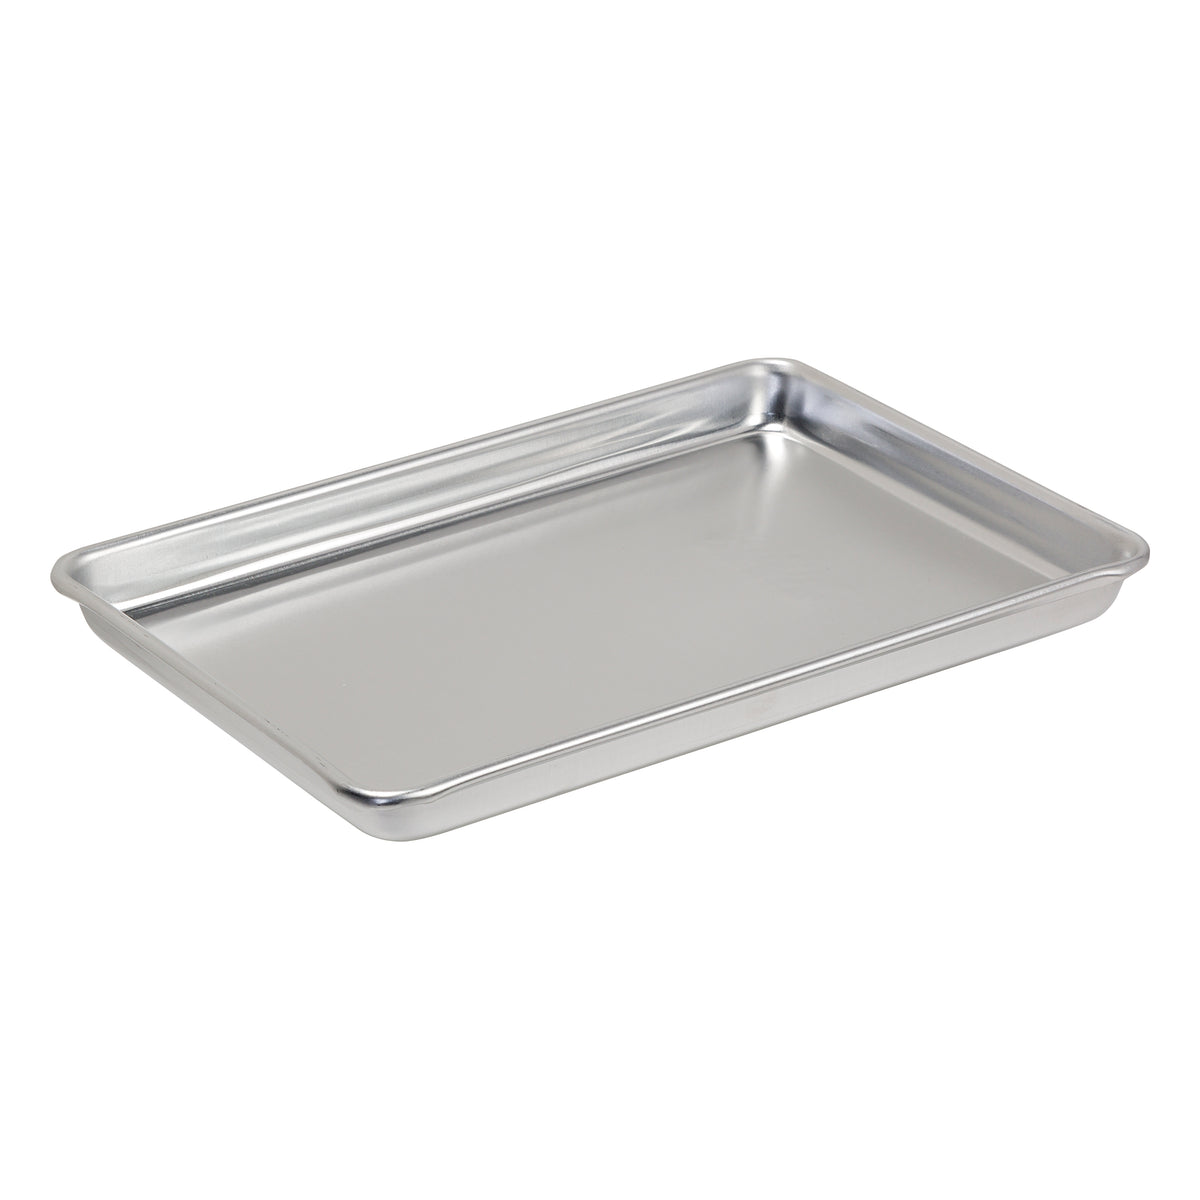 Pampered Chef Toaster Oven, Small Bar Pan, 8.75 x 6.5 x 0.75